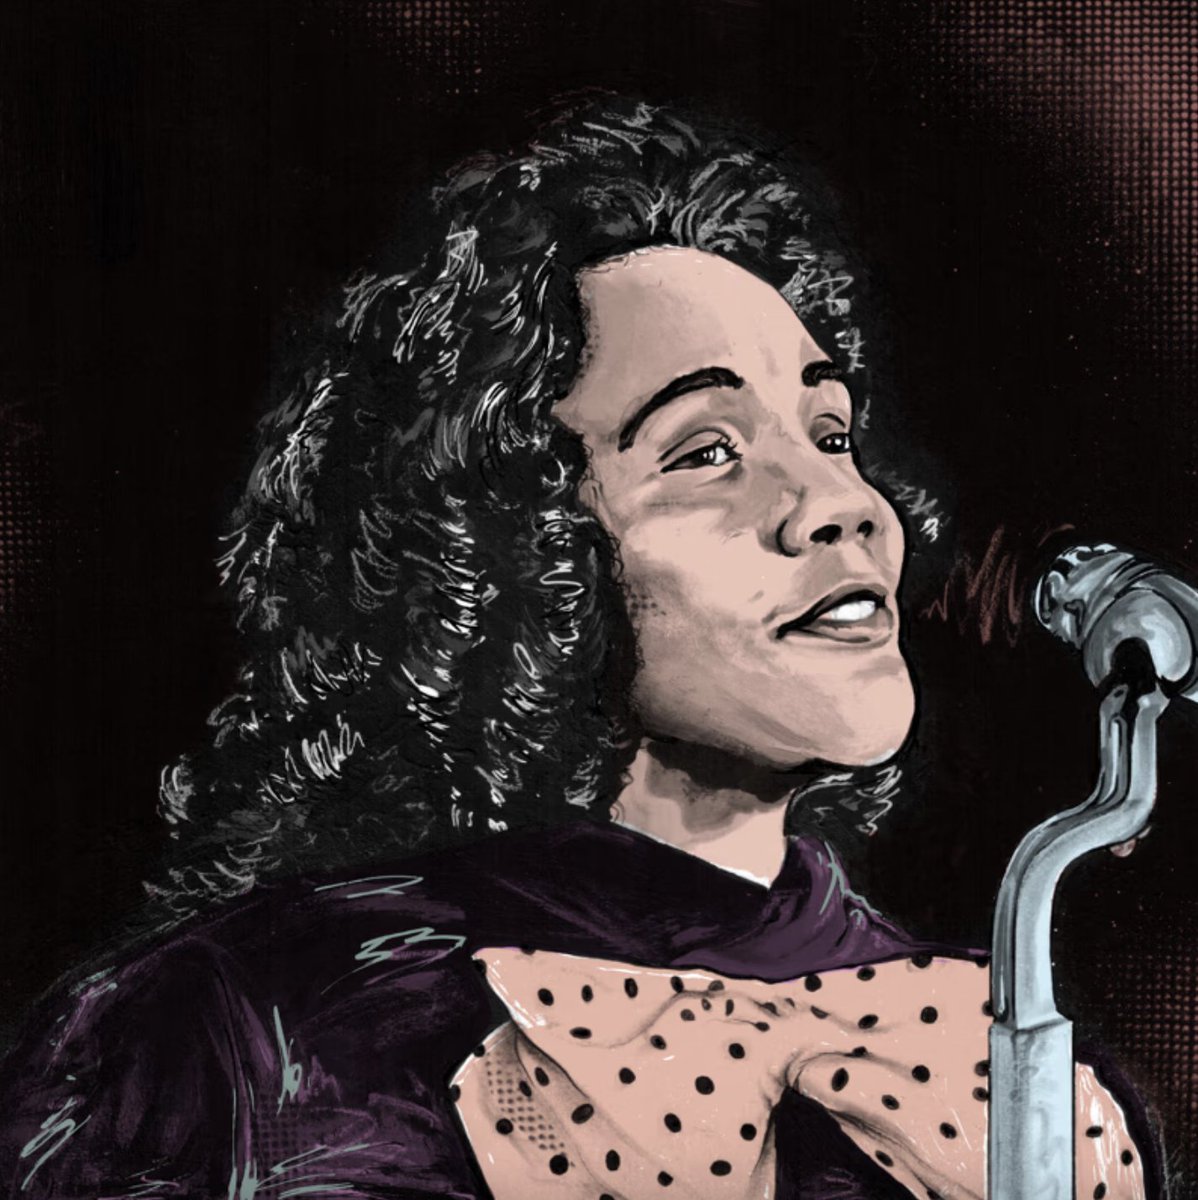 We're honoring Coretta Scott King for #WomensHistoryMonth, a civil rights leader and advocate for peace and justice. This artwork was inspired by Ernest Withers' photo of King speaking at Mason Temple in Memphis in 1968. #CorettaScottKing #ErnestWithers